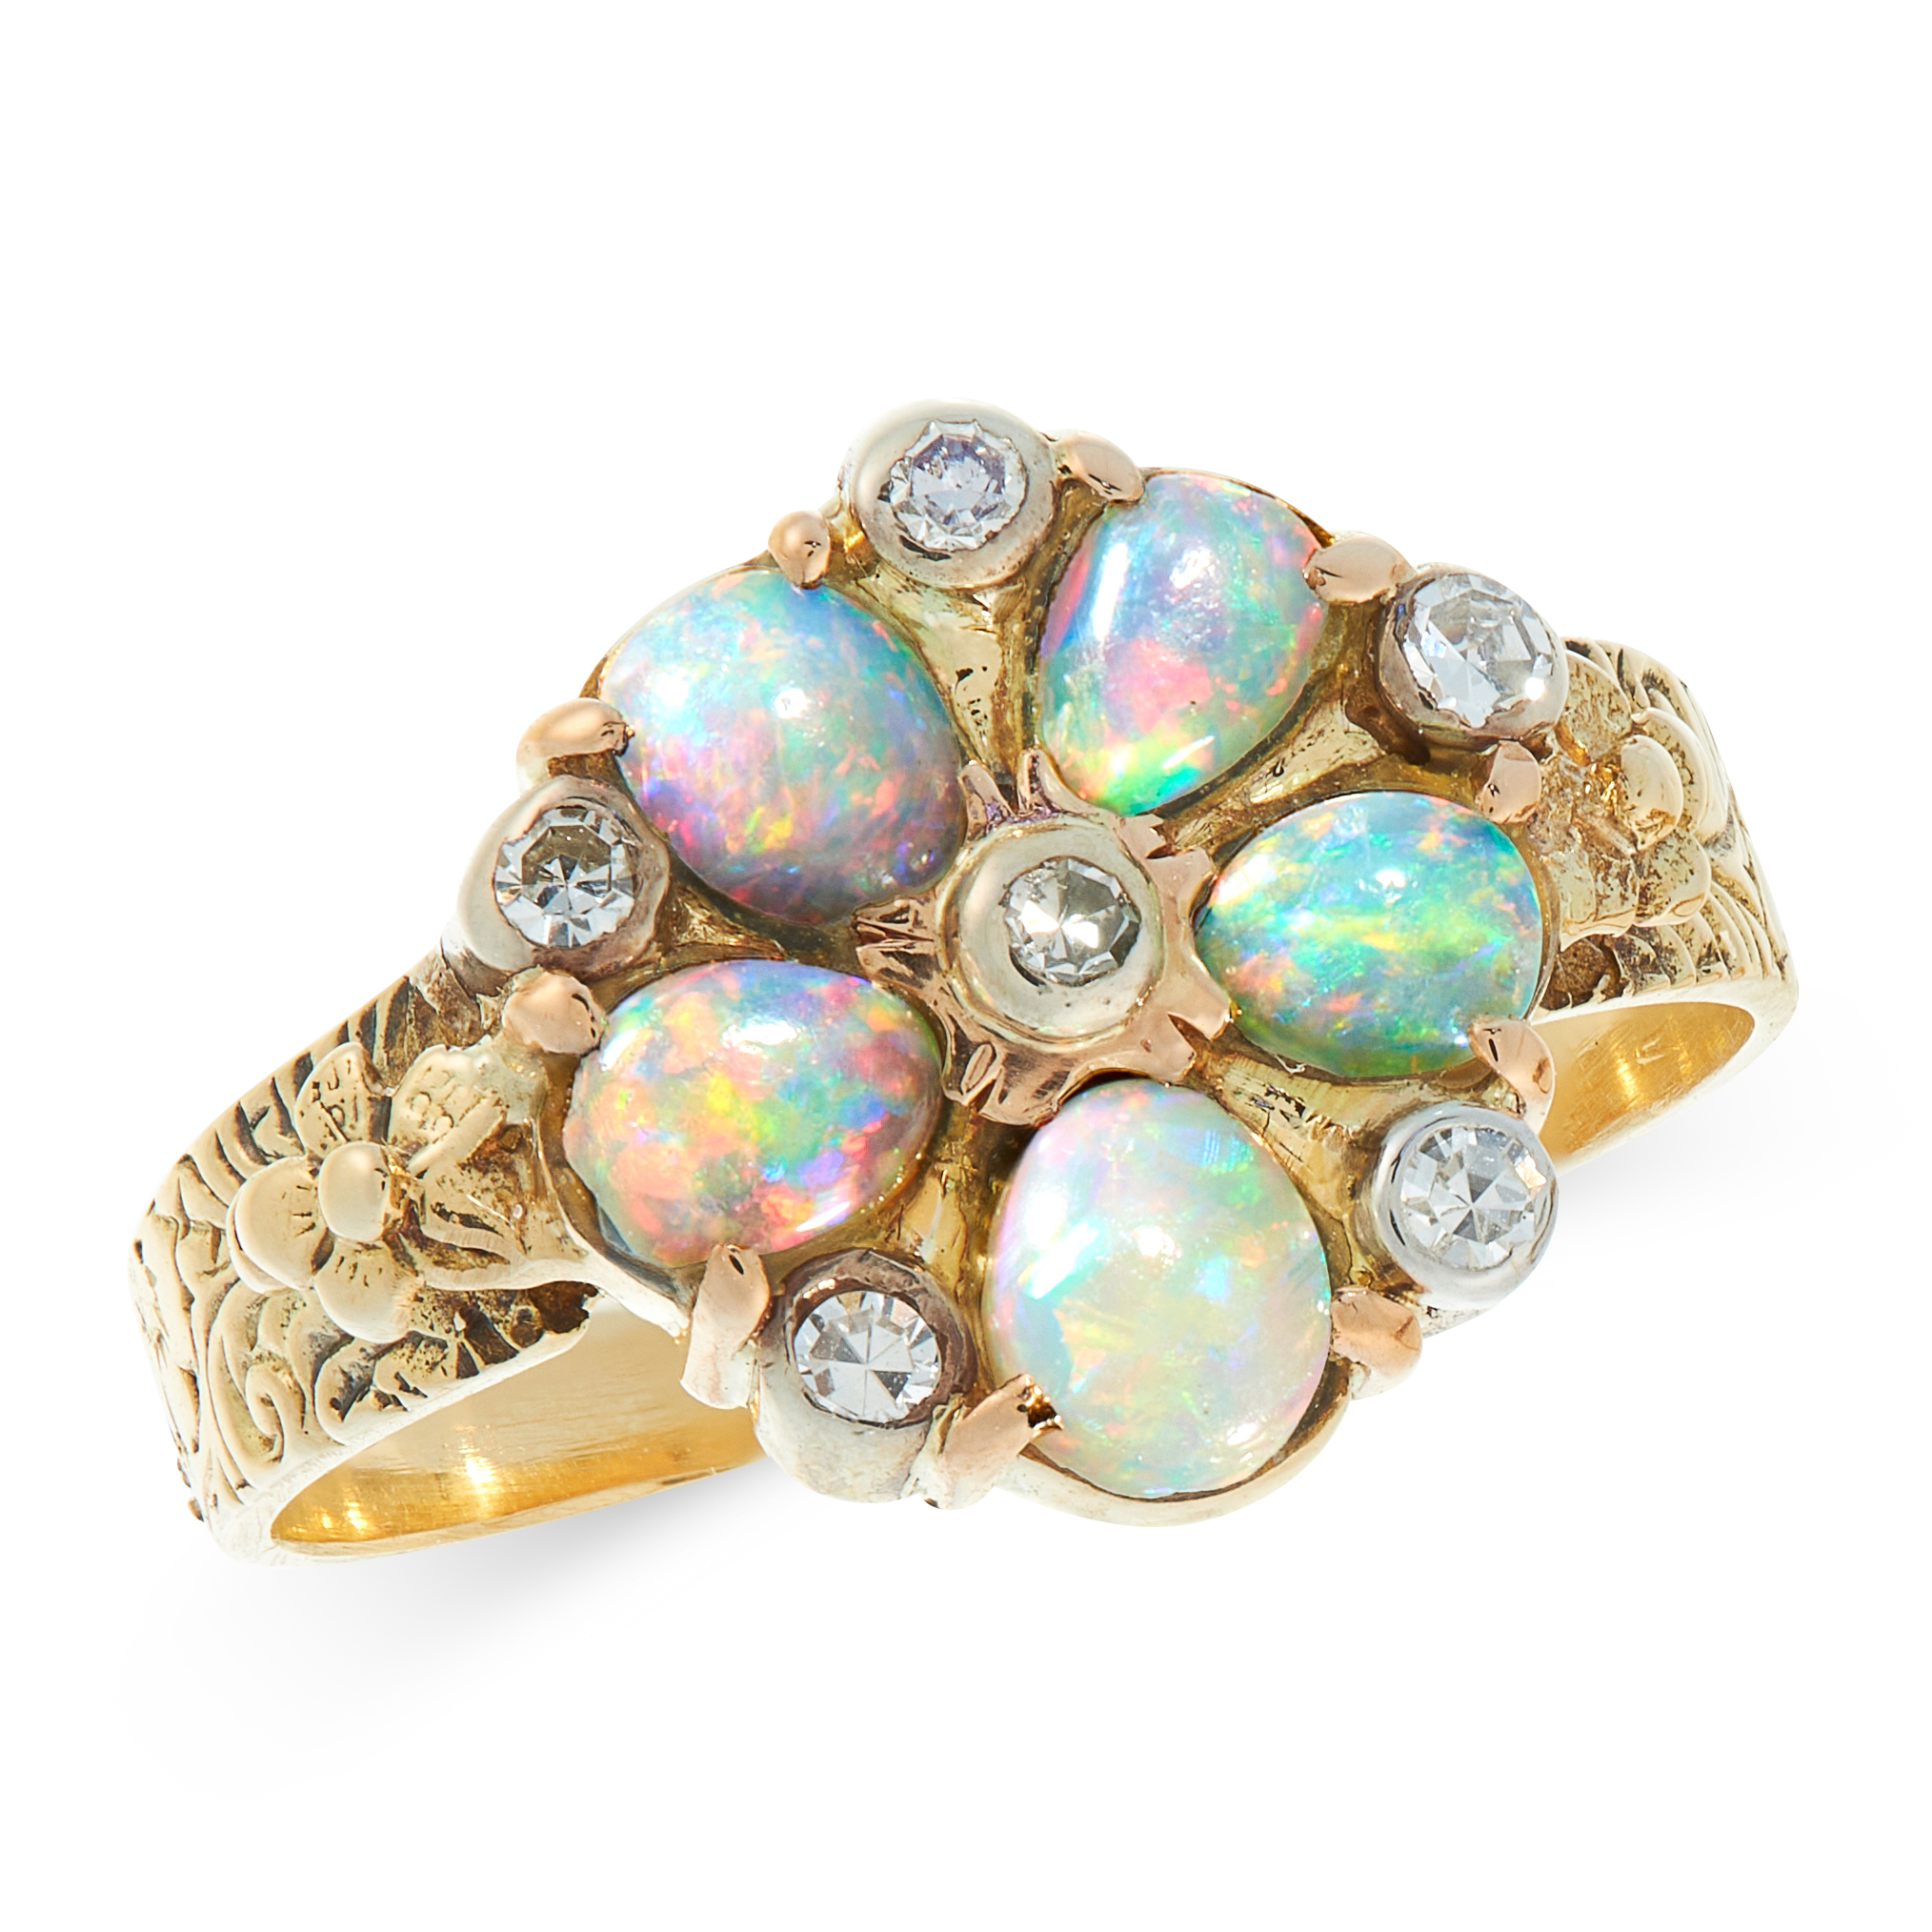 AN ANTIQUE OPAL AND DIAMOND DRESS RING in high carat yellow gold, the face set with five graduated